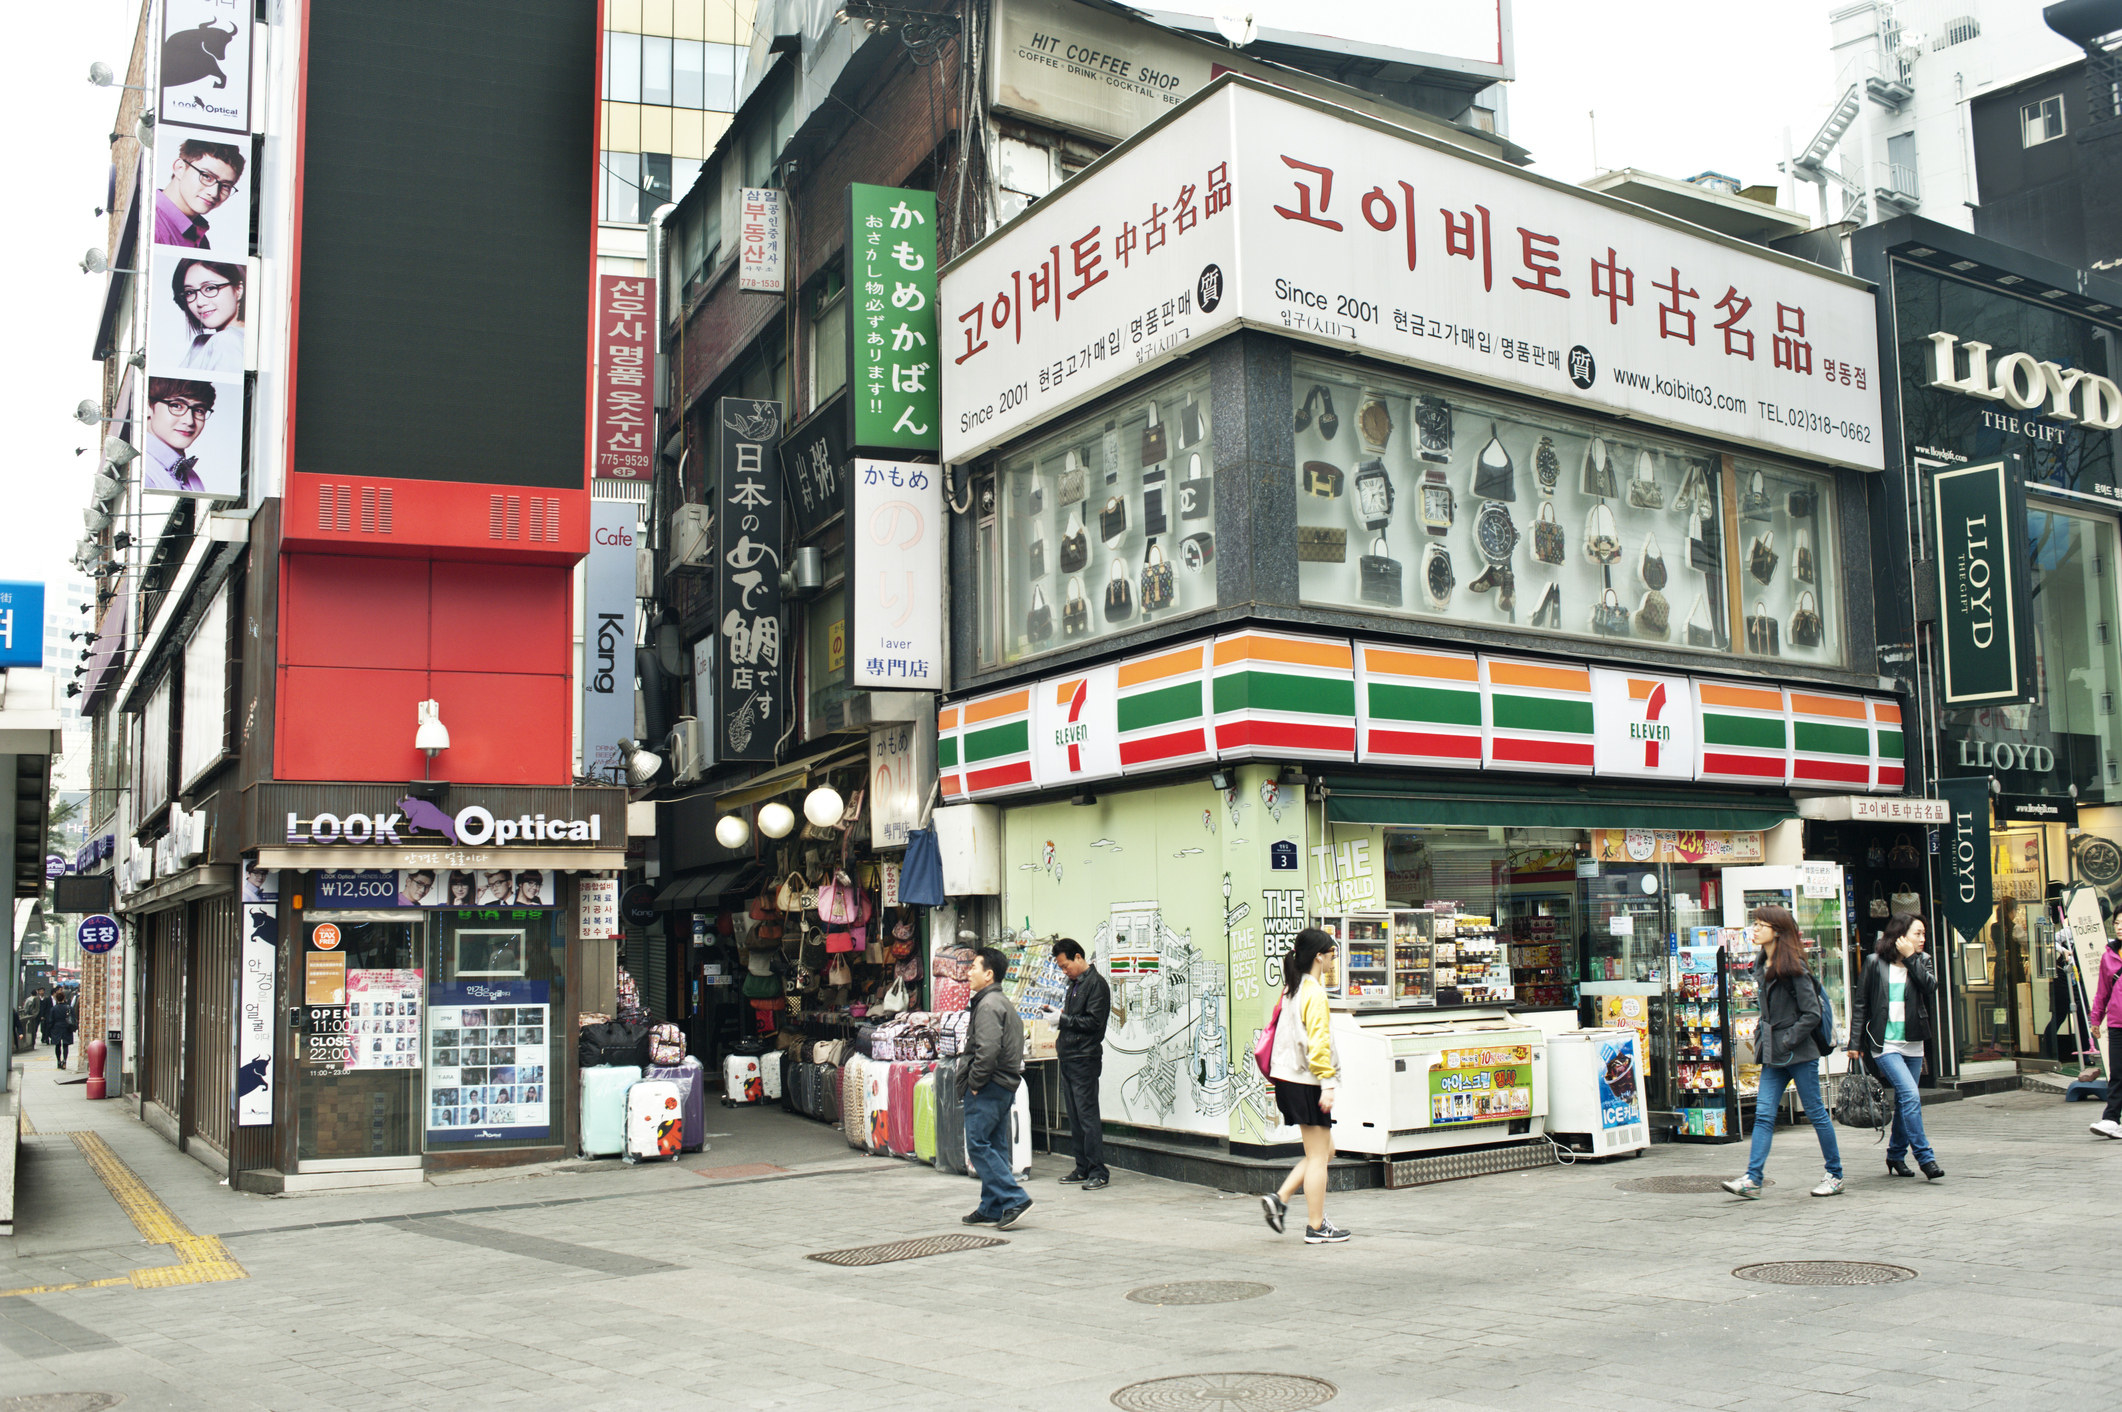 A 7-11 store in South Korea.